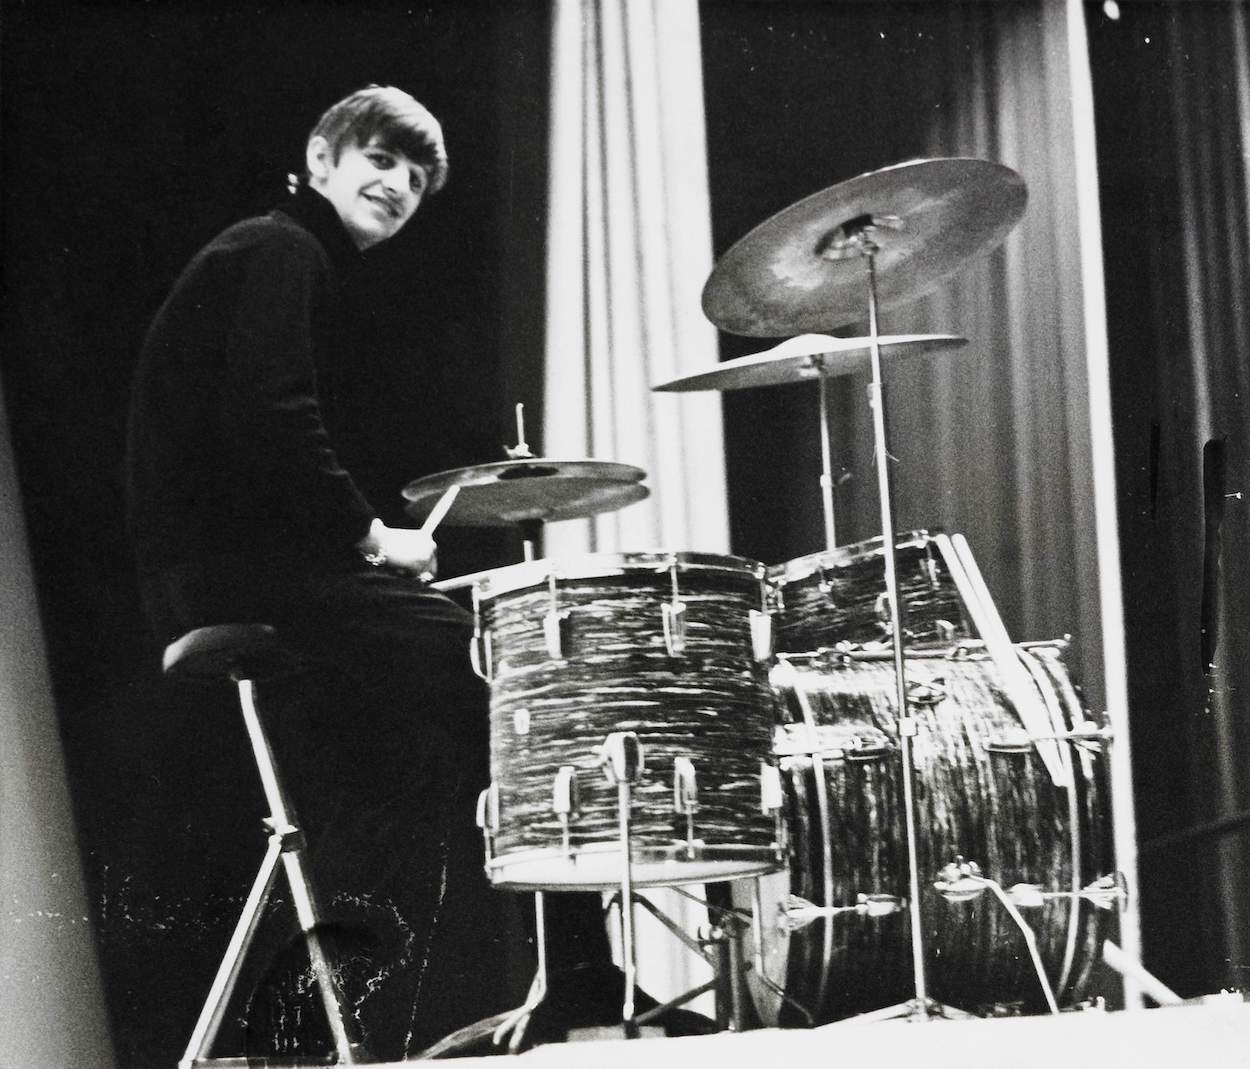 Ringo Starr, who rightly earned his praise from Elvis Presley's drummer, at his drum kit in 1963.